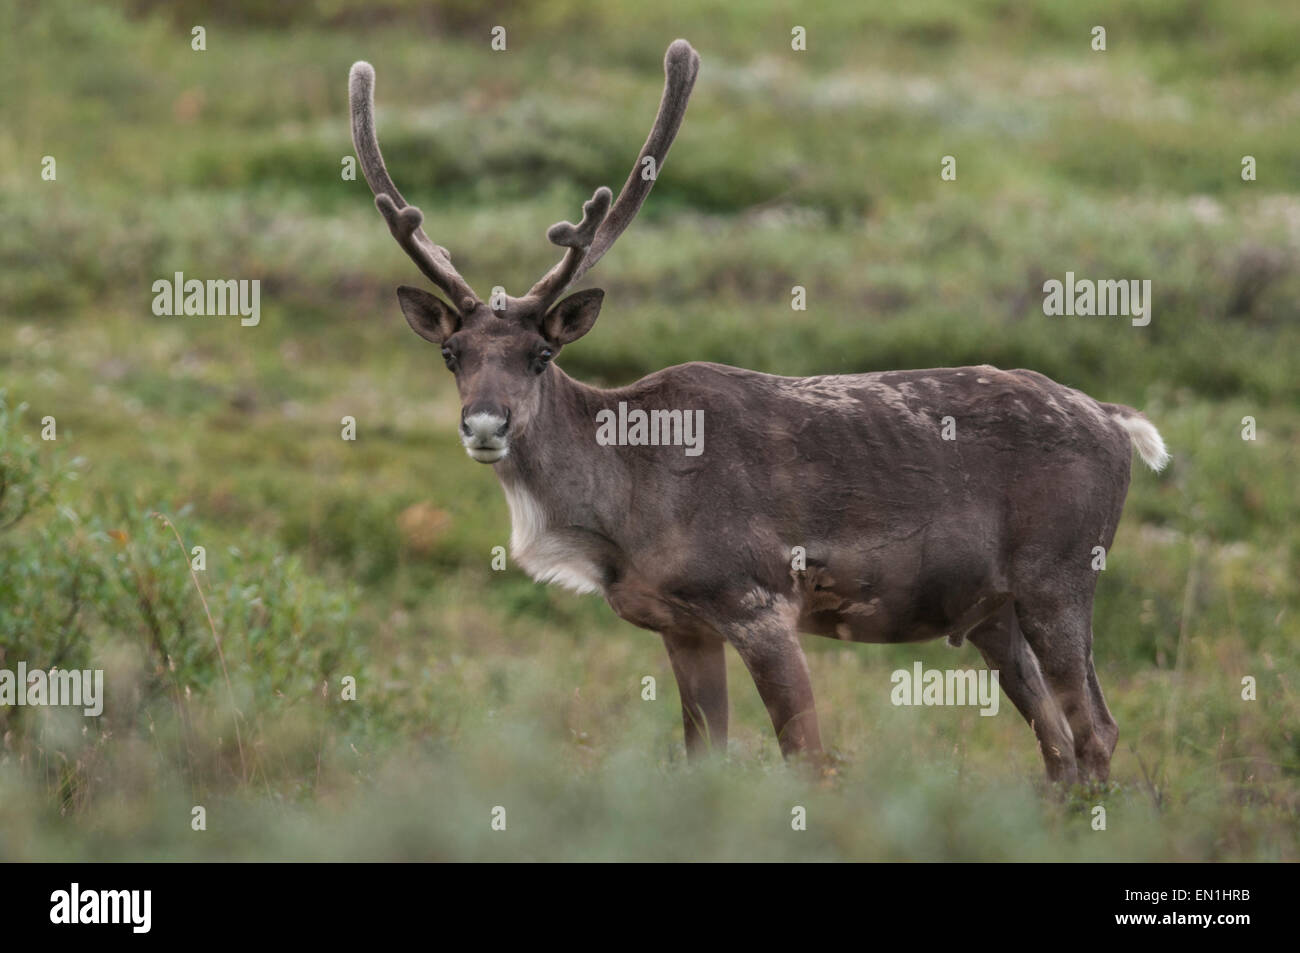 A young bull caribou (Rangefer tarandus) has yet to completely shed his winter coat in favor of the sleek two level brown coat h Stock Photo